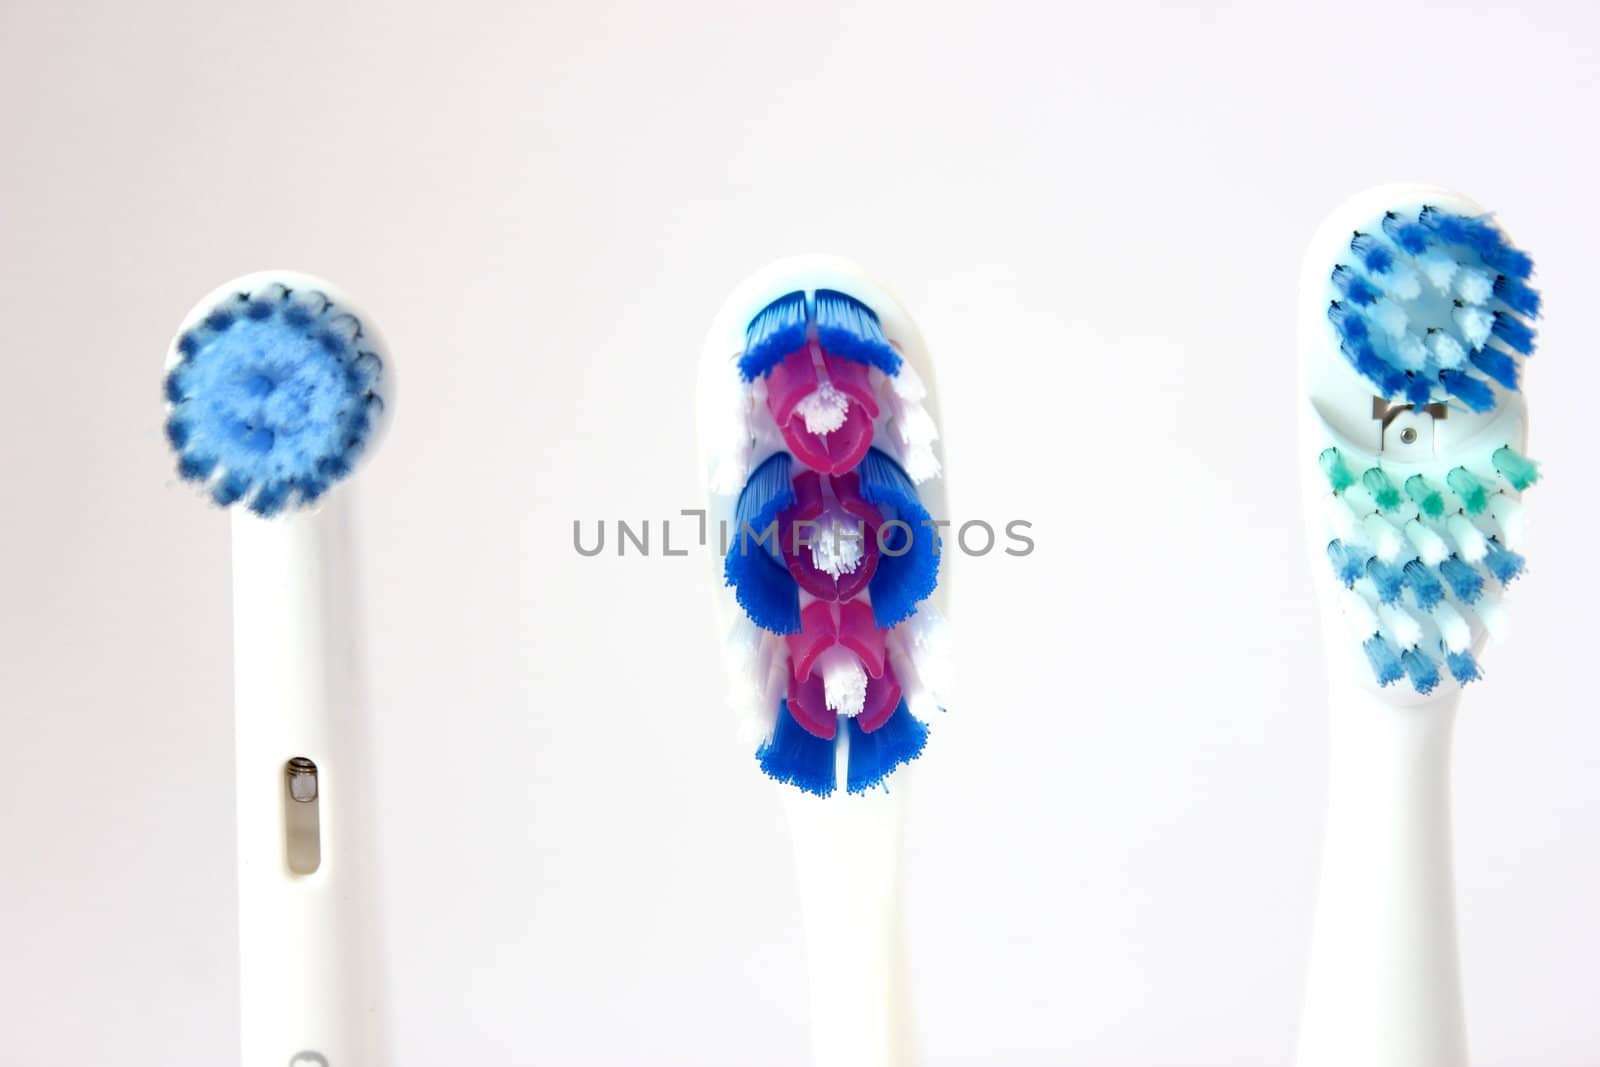 Different Toothbrush Heads by abhbah05